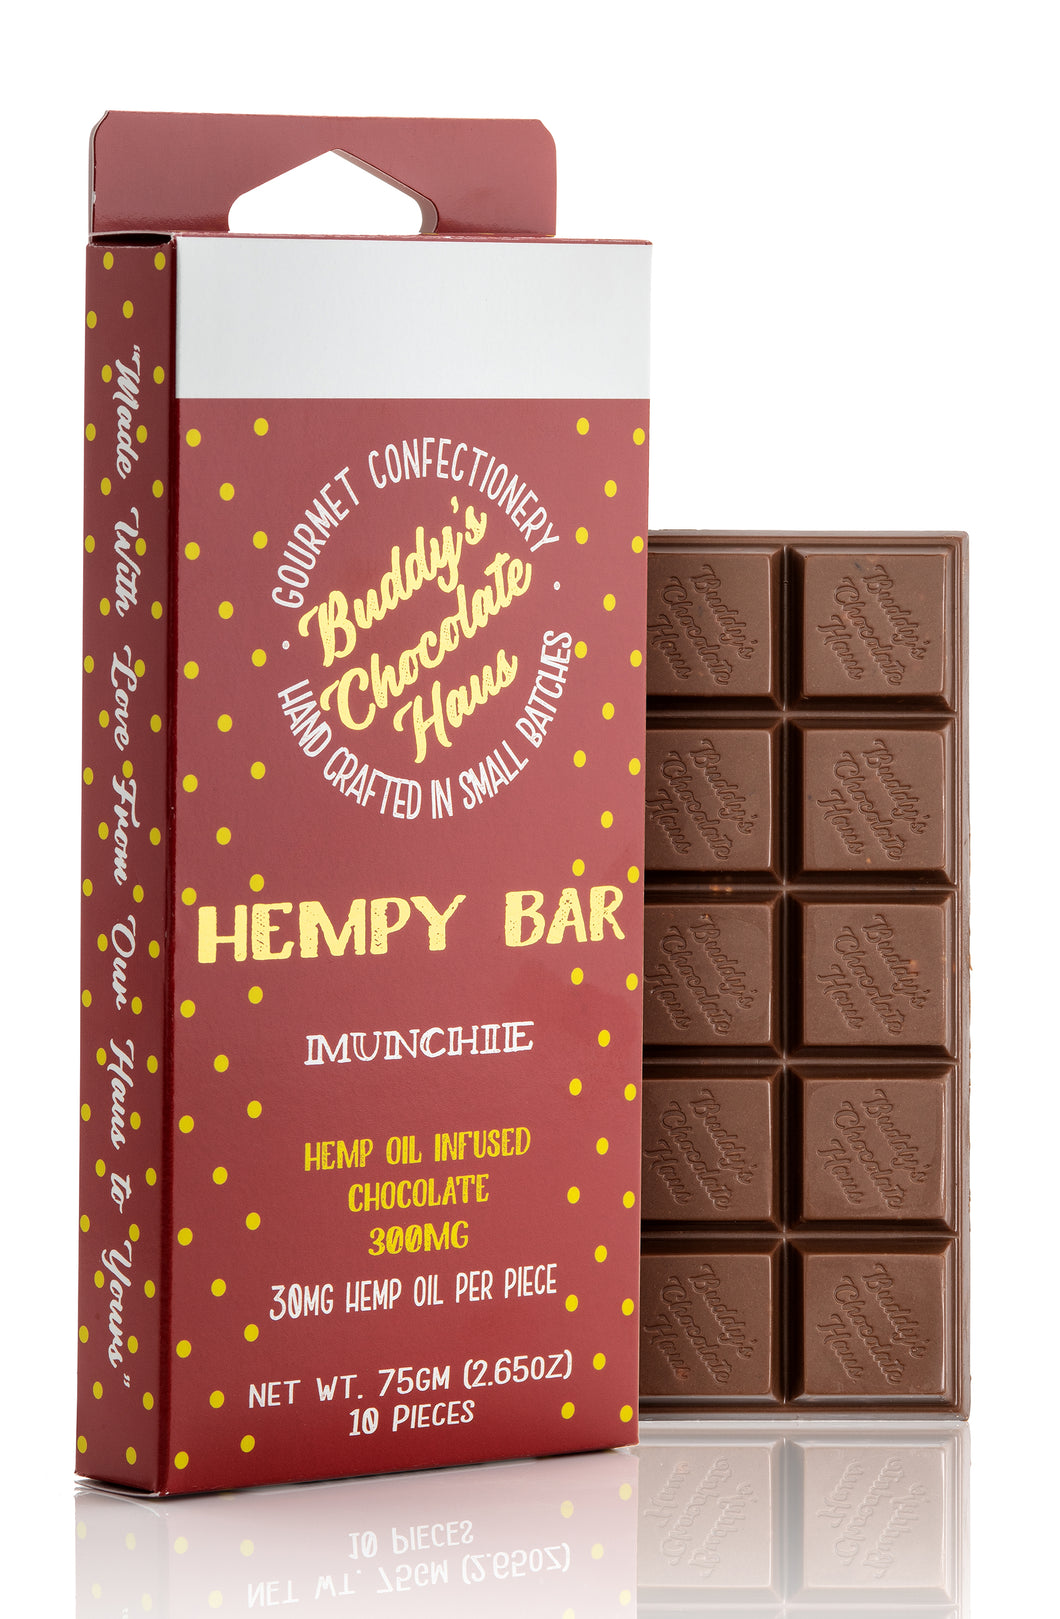 munchie chocolate peanut butter bar infused with CBD derived from hemp